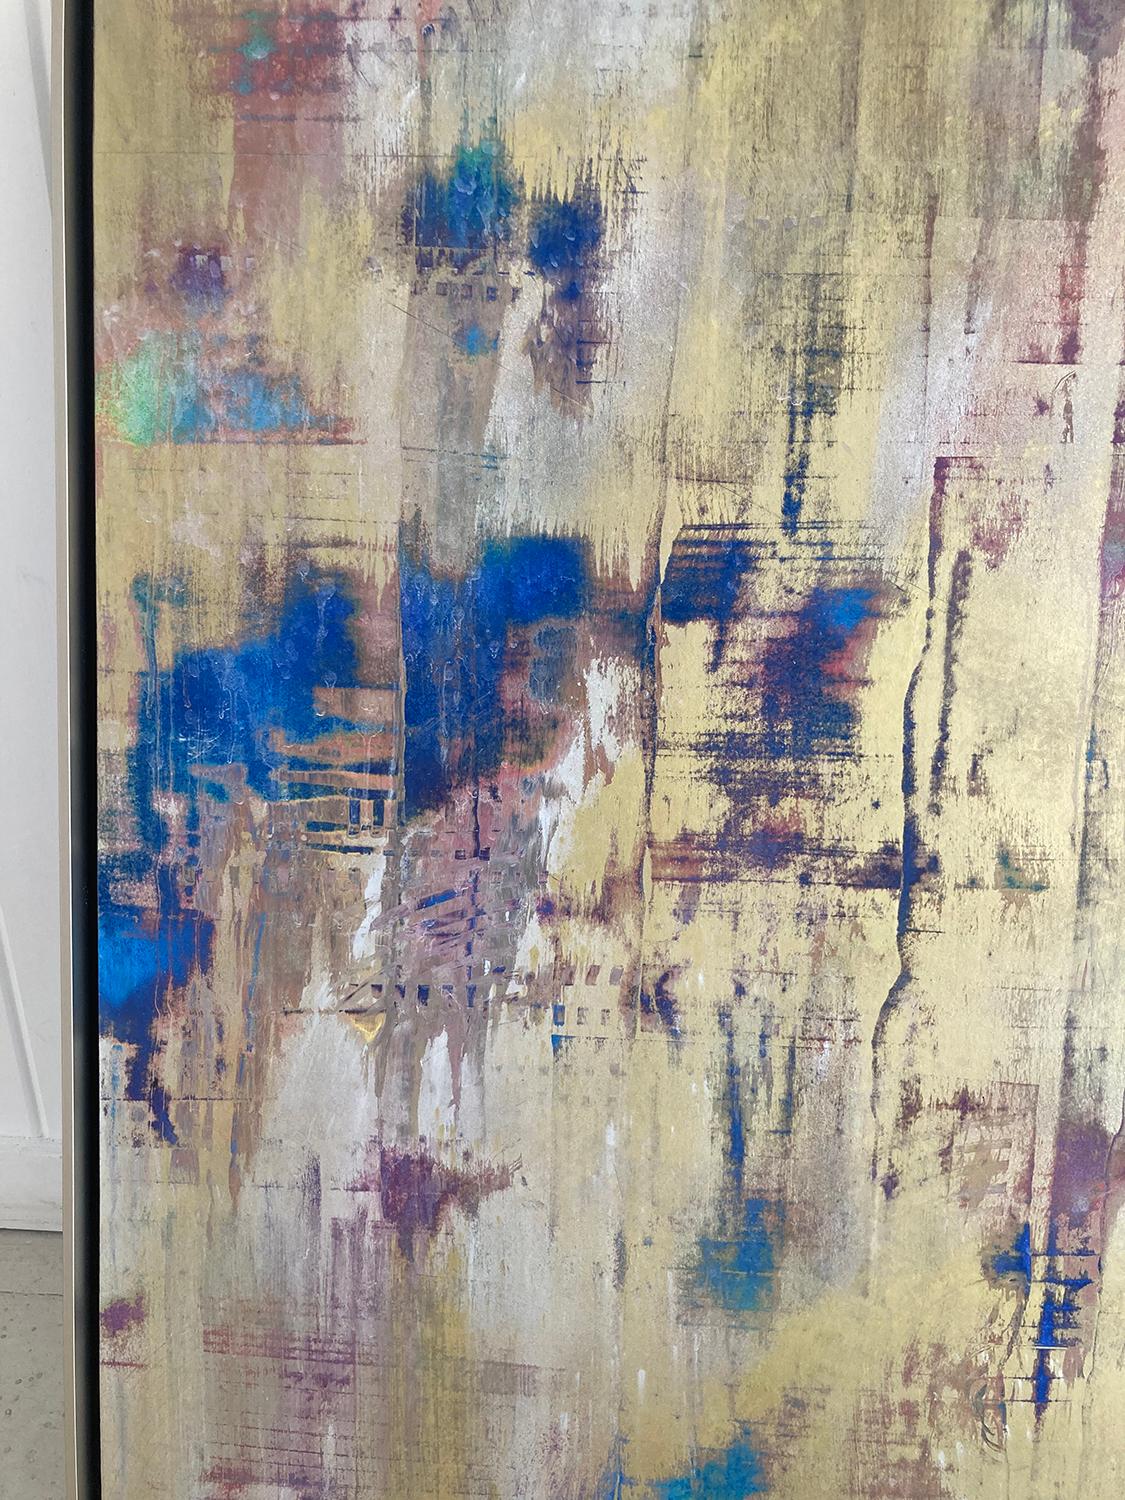 Gestural abstract expressionist painting on archival paper mounted to panel with gold and silver metallic powders and accents of blue, mauve, and teal enamel paint
